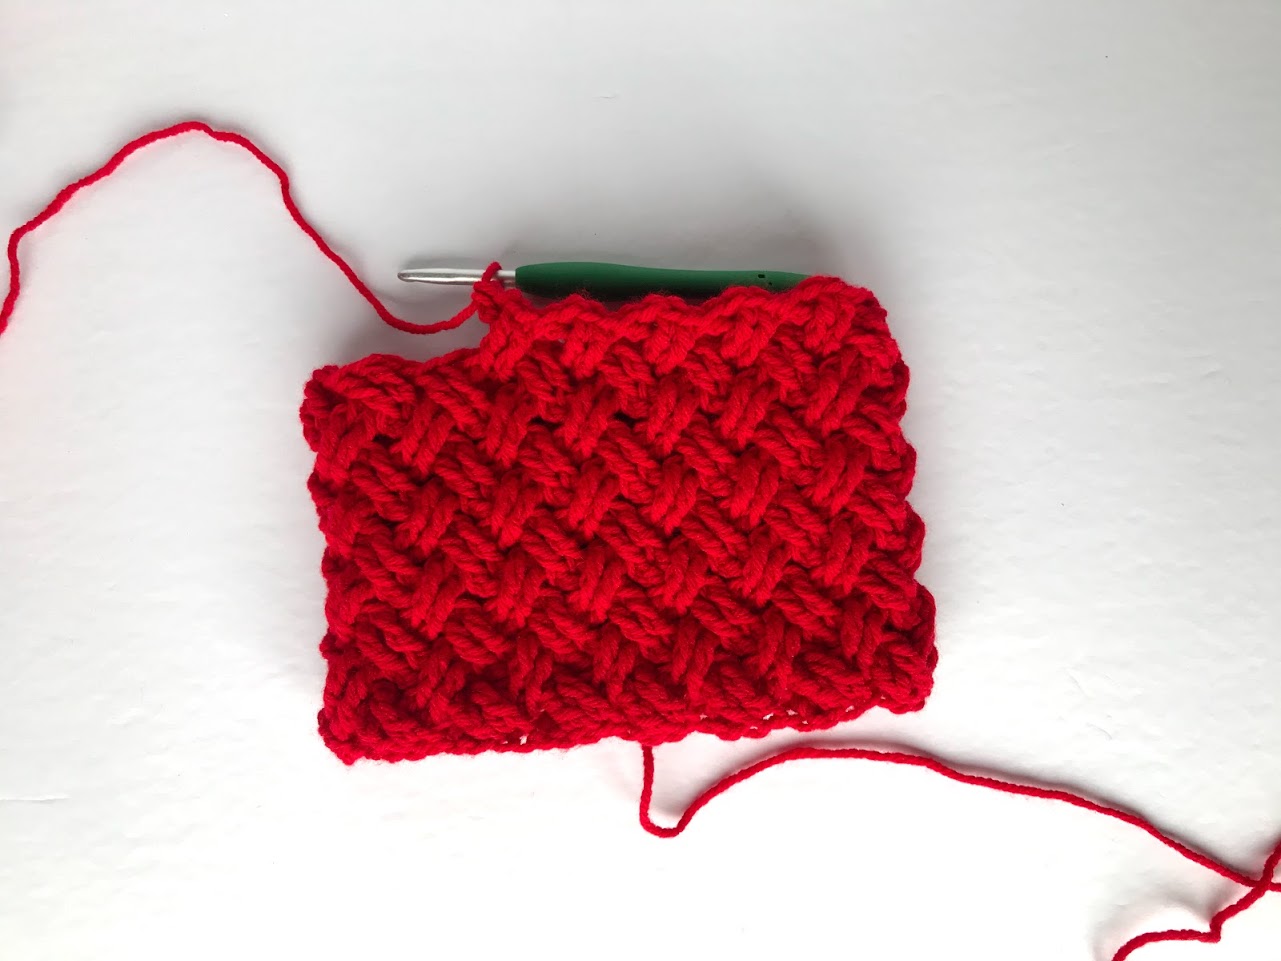 How to Work the Celtic Weave Stitch in the Round - Crochet It